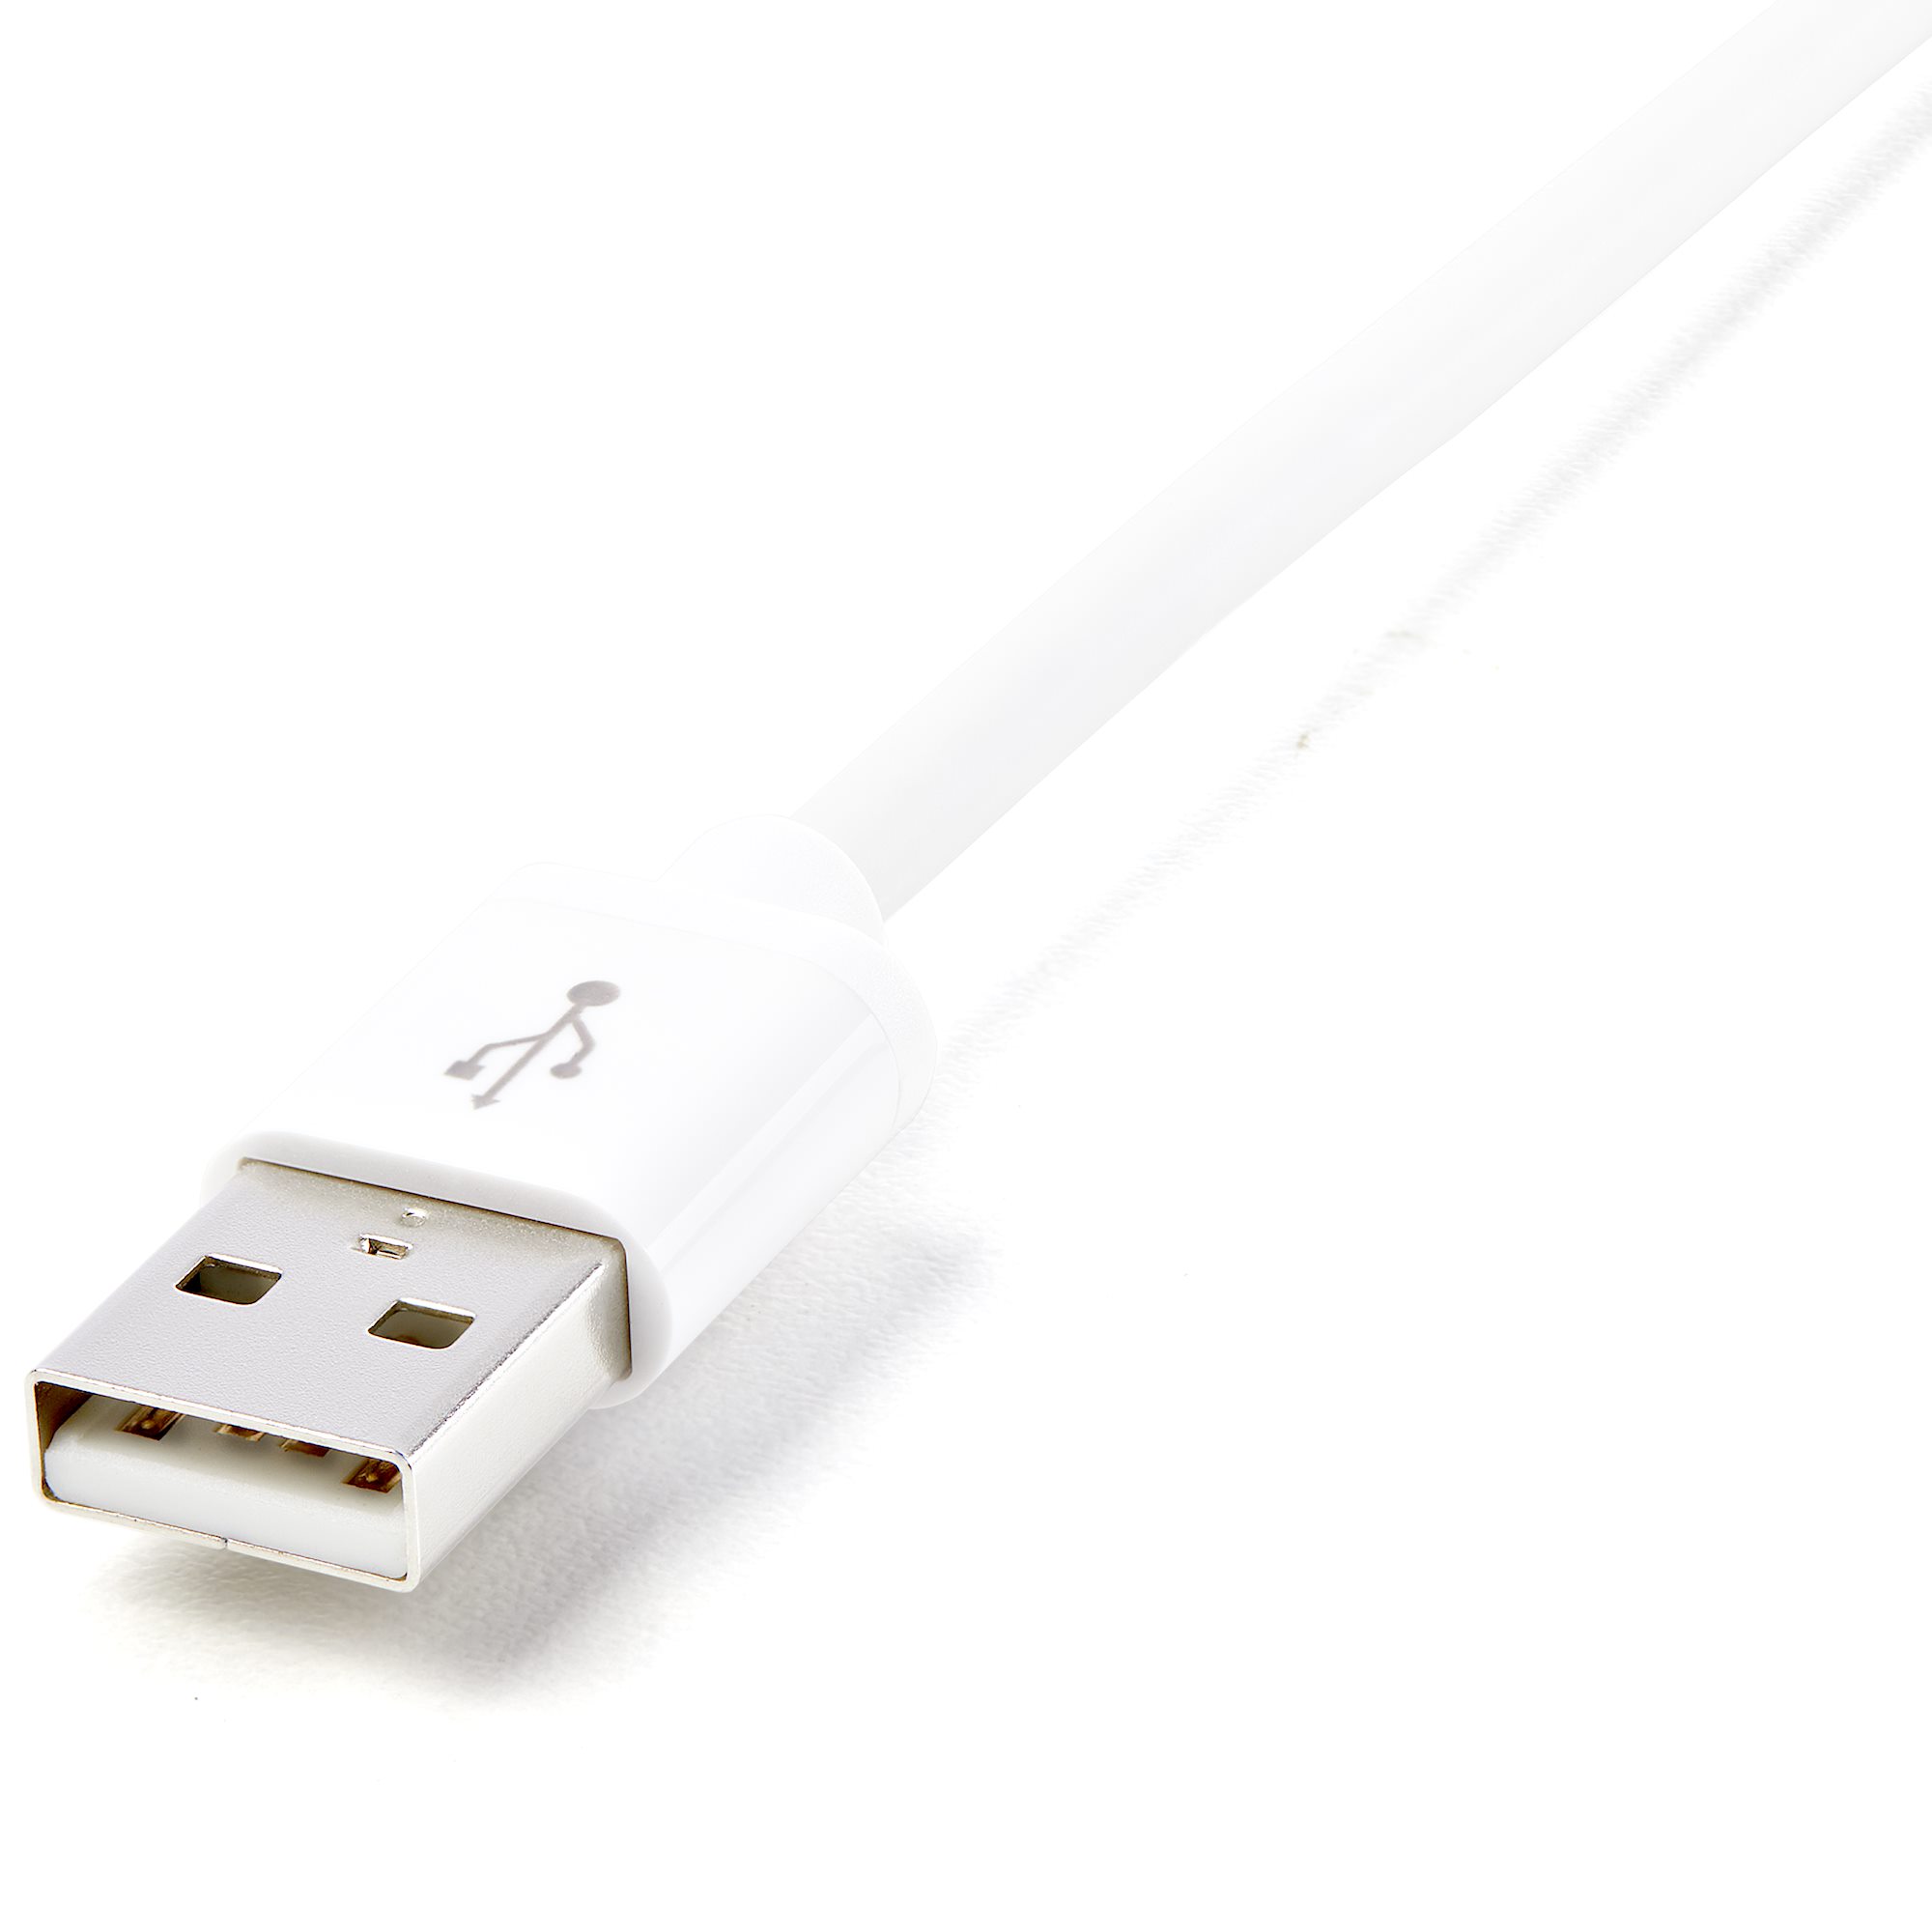 Apple Lightning to USB Cable (1 m) : Electronics 